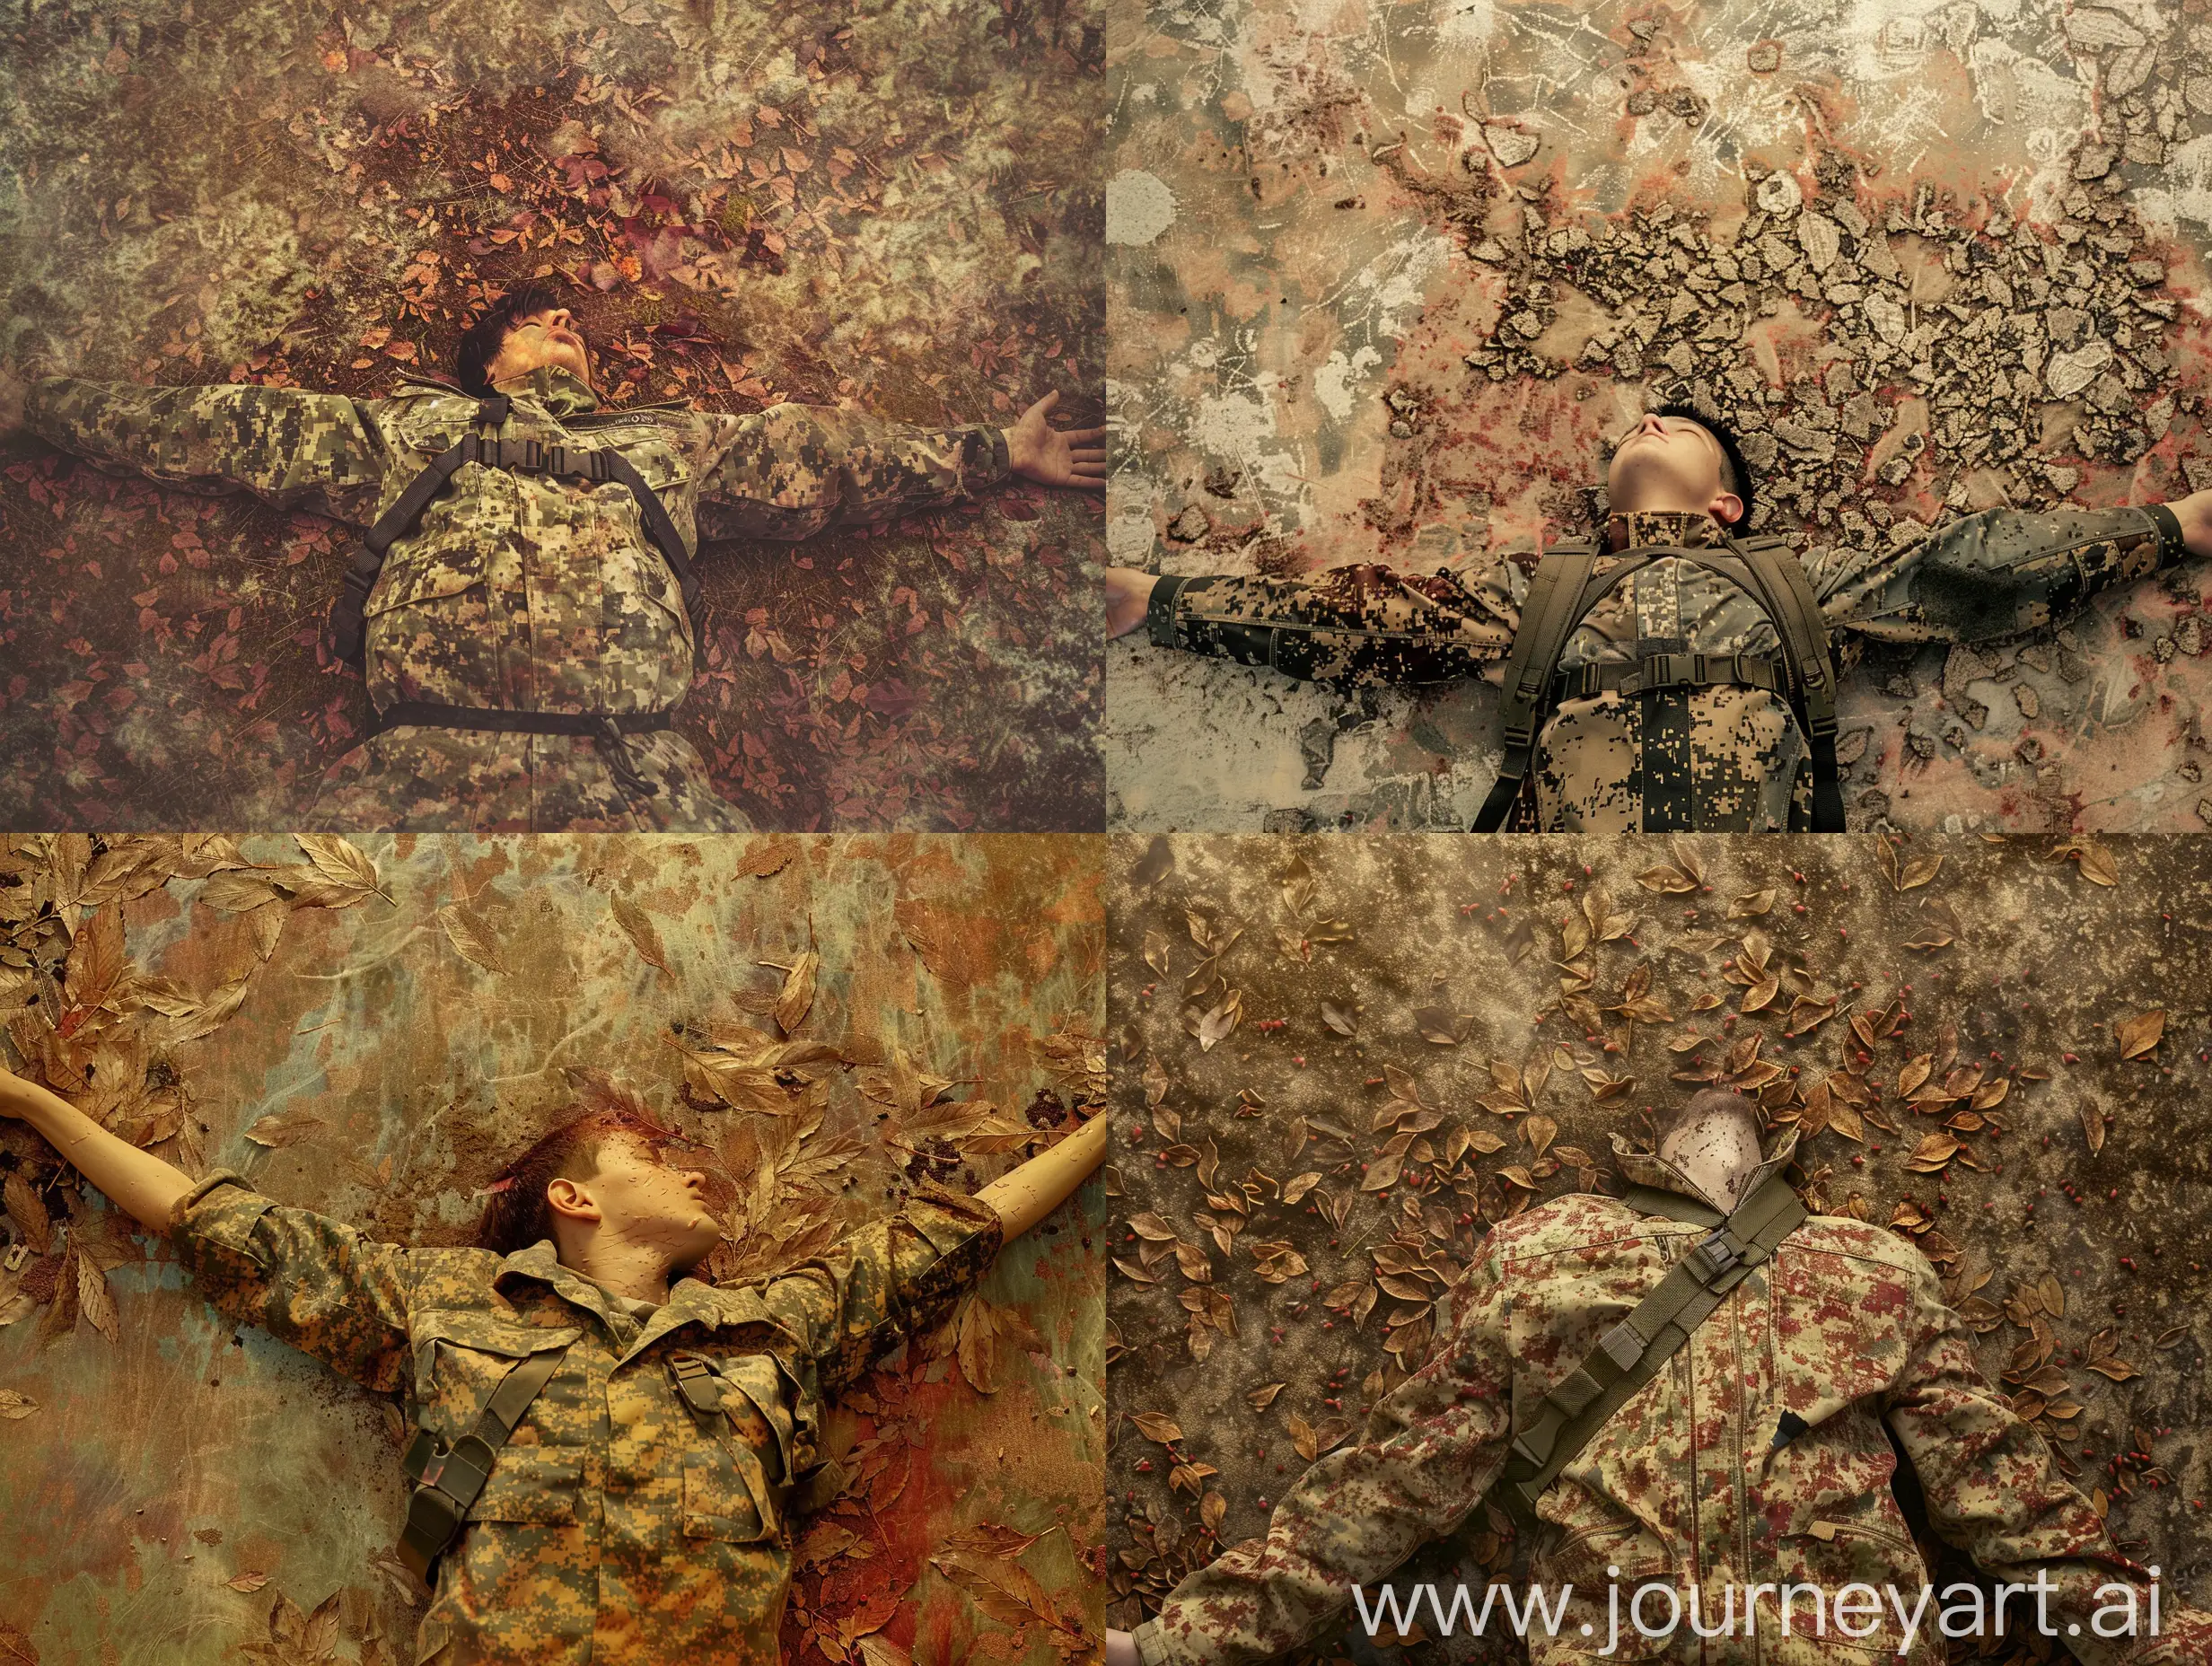 Camouflaged-Person-in-Natural-Environment-MilitaryStyle-Blending-in-Autumn-Foliage